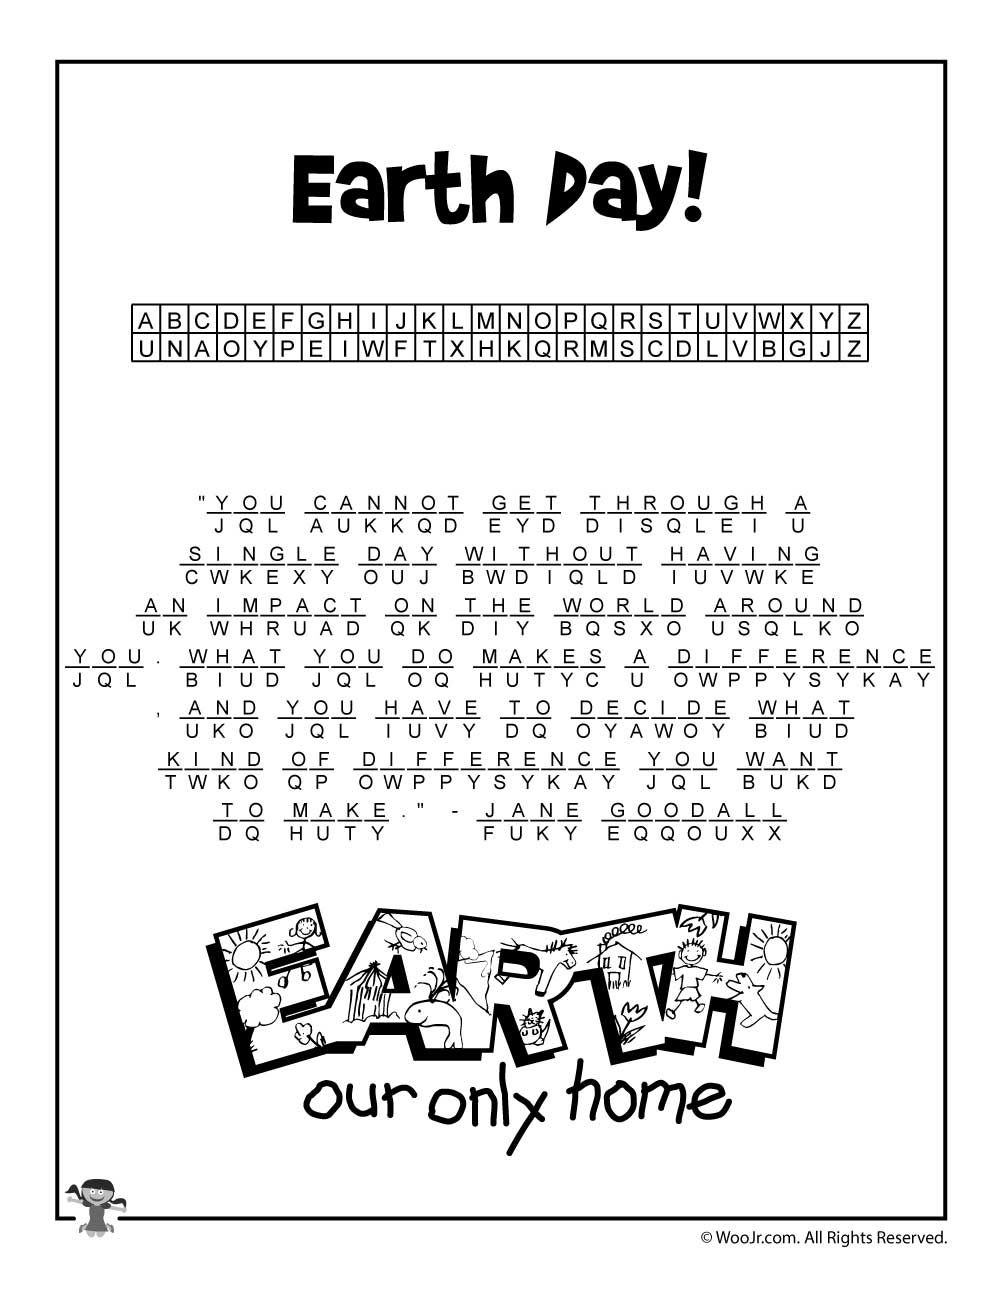 Earth Day Cryptogram Puzzle Solution | Class Decorations | Earth Day - Printable Cryptogram Puzzles With Answers